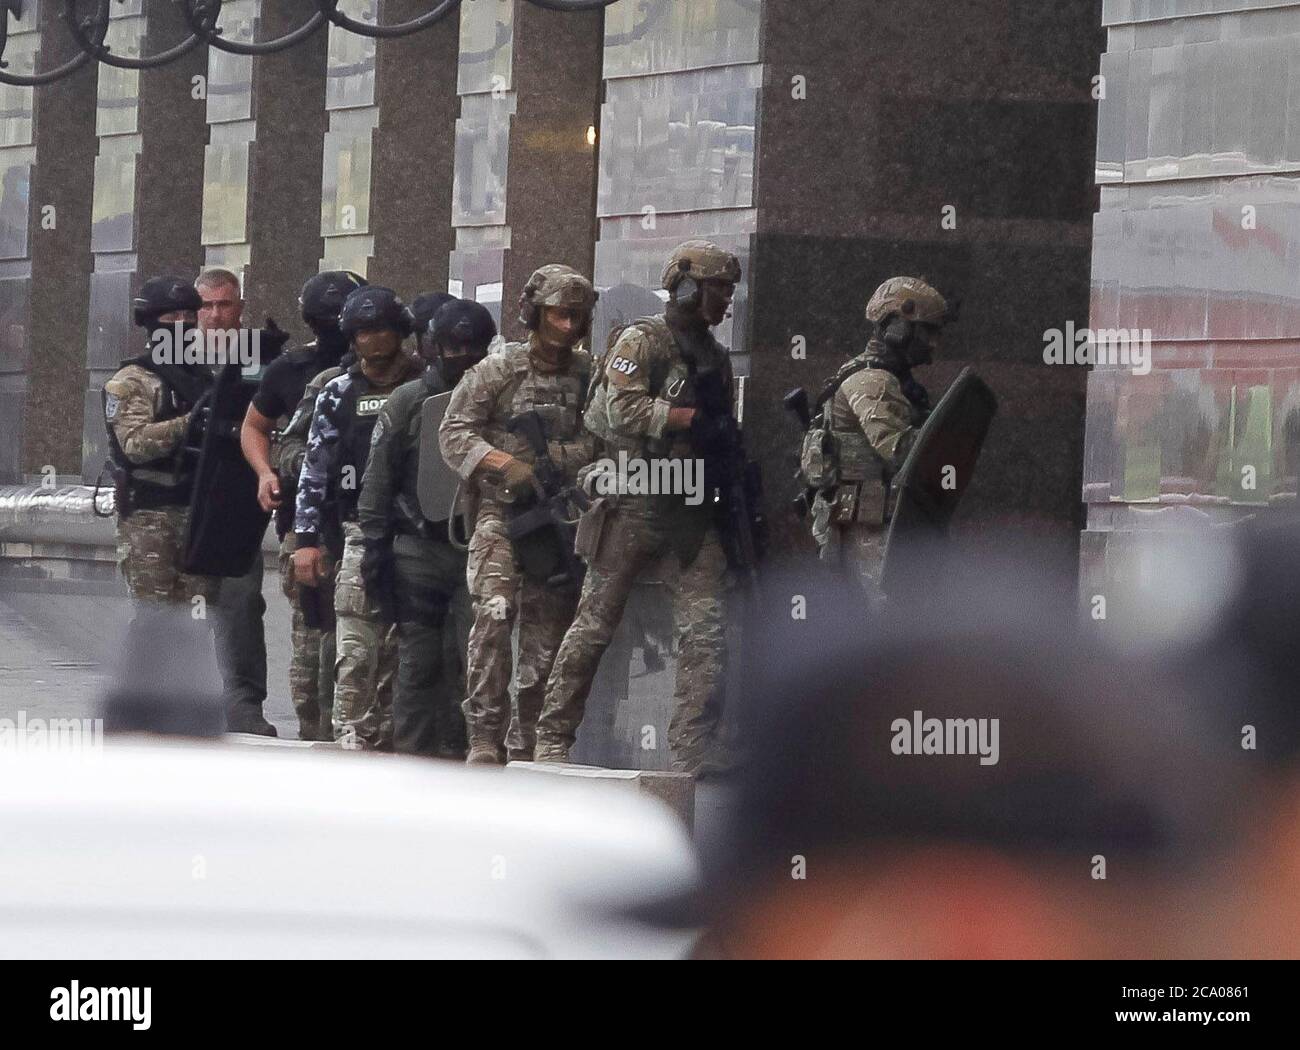 Kiev, Ukraine. 3rd Aug, 2020. Special team of the Security Service of Ukraine prepare to enter inside the building where an unidentified man threatens to blow up a bomb at the Universal bank office in Kiev, Ukraine, on 3 August 2020. The SBU Security Service of Ukraine's specops unit detained Uzbekistan citizen who threatened to blow up a bank office in the capital city of Kiev, according to media. Credit: Serg Glovny/ZUMA Wire/Alamy Live News Stock Photo